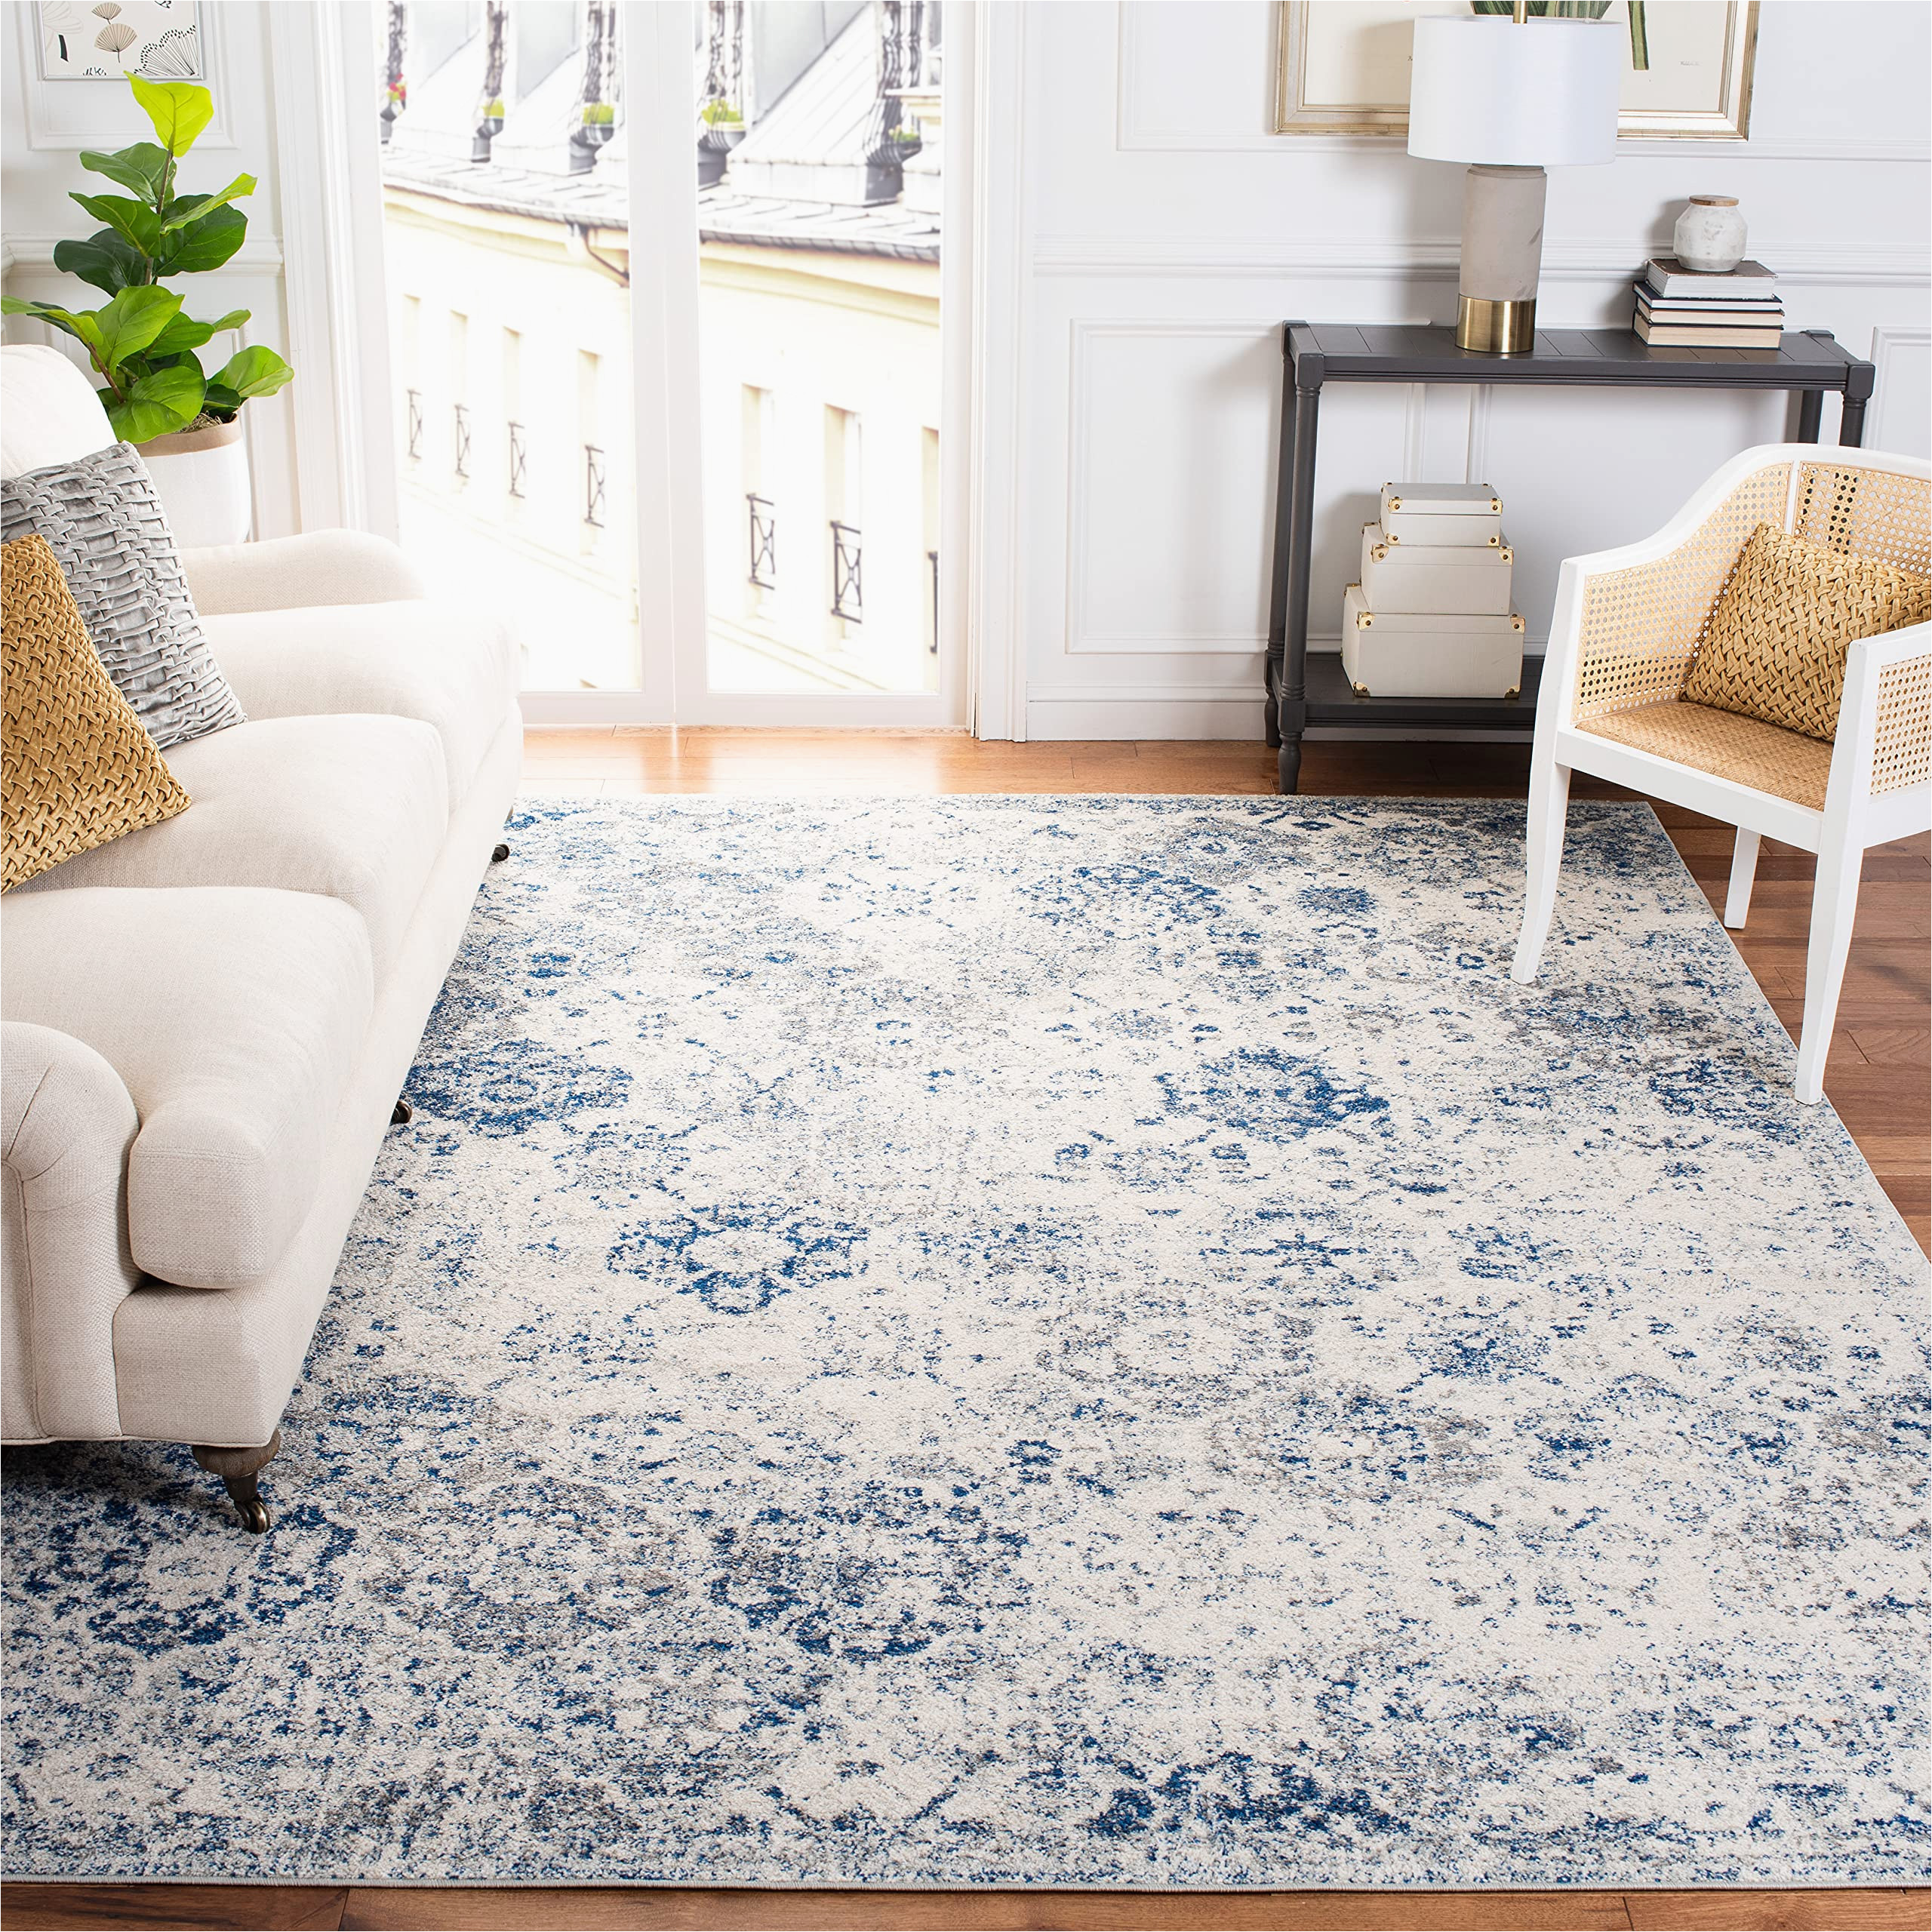 Safavieh Blue and White Rug Safavieh Madison Collection 6’7″ X 9’2″ White / Royal Blue Mad611c Boho Chic Floral Medallion Trellis Distressed Non-shedding Living Room Bedroom …